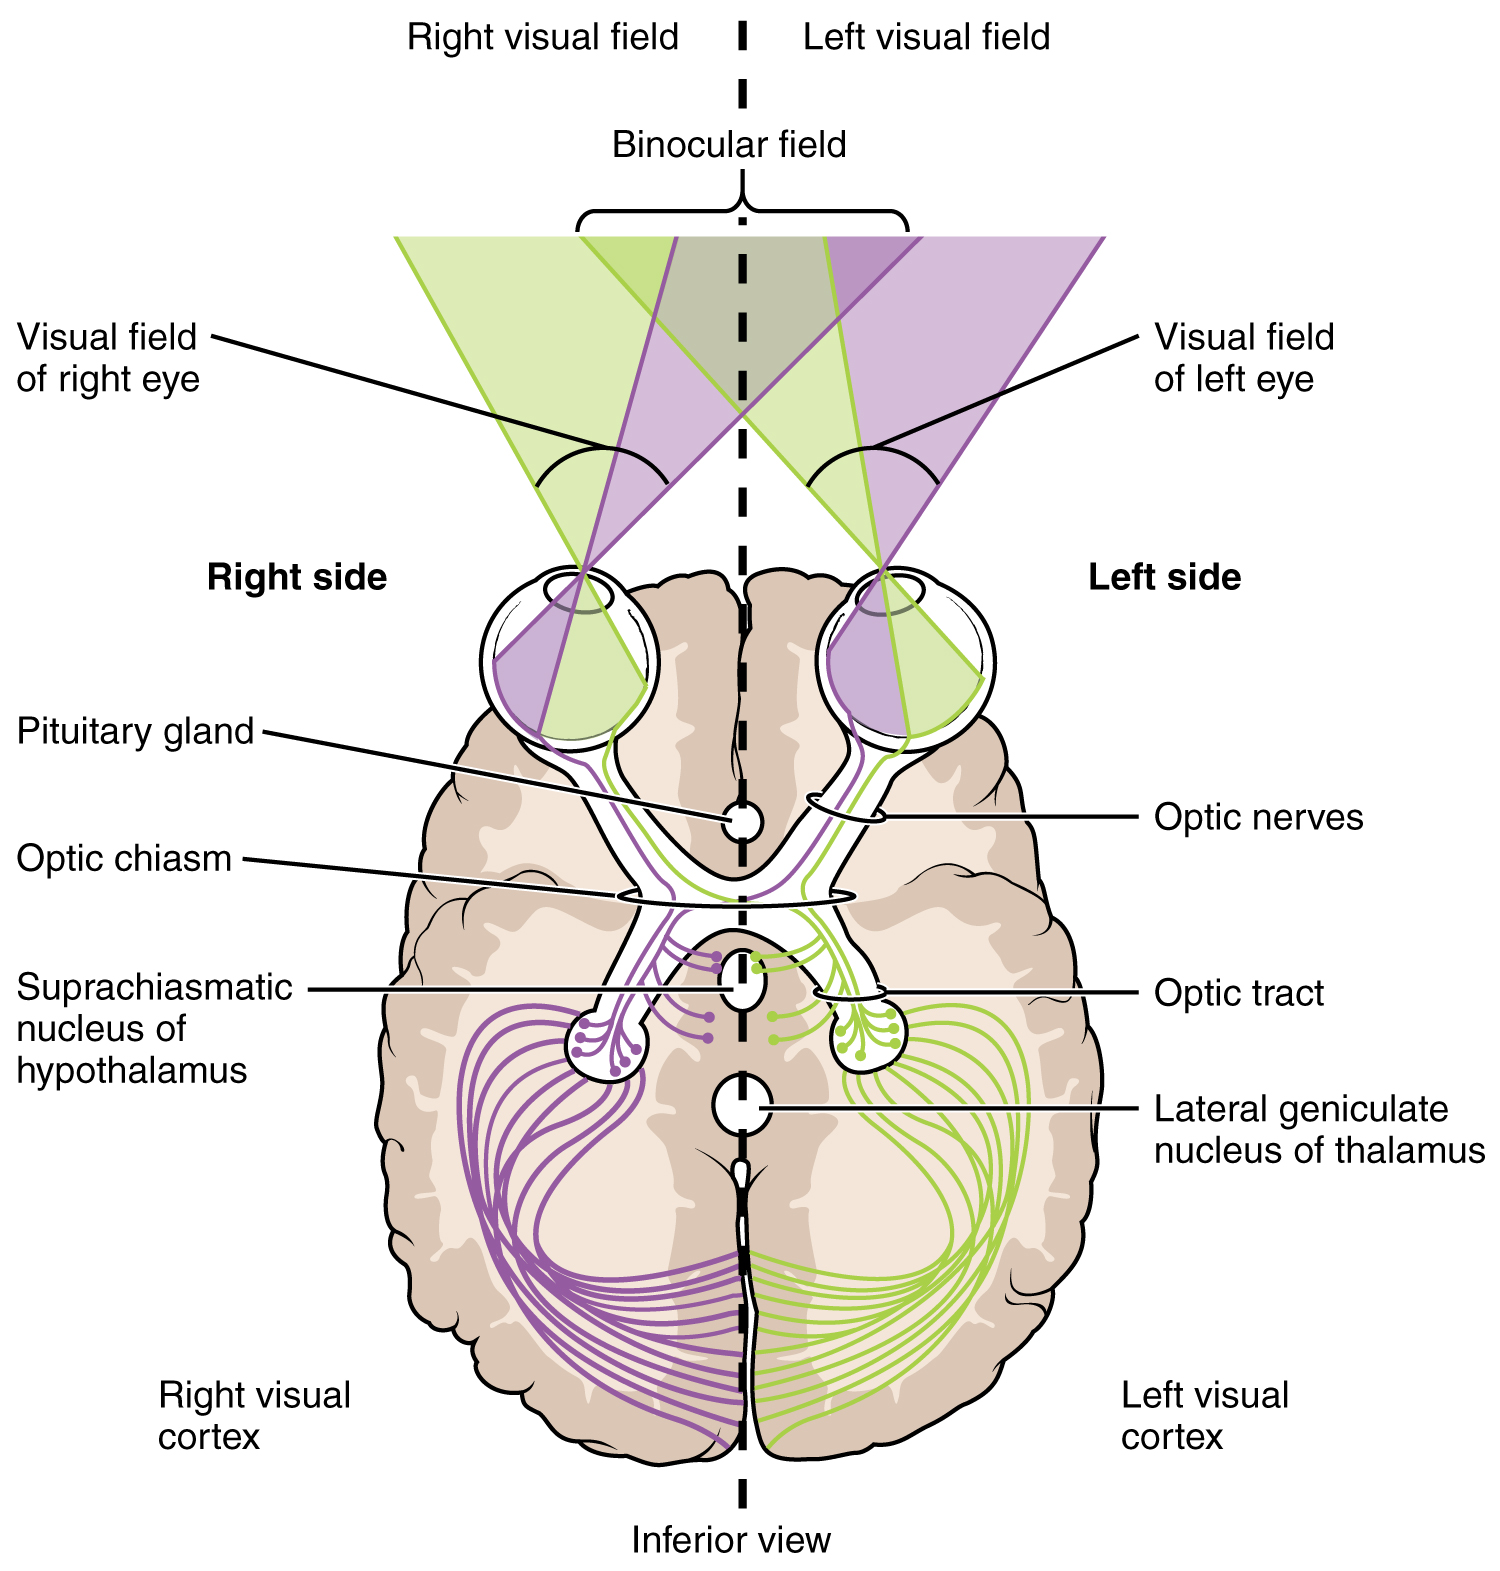 This image shows the right and left visual fields in the brain. It describes how the optical fields map to different sides of the brain.